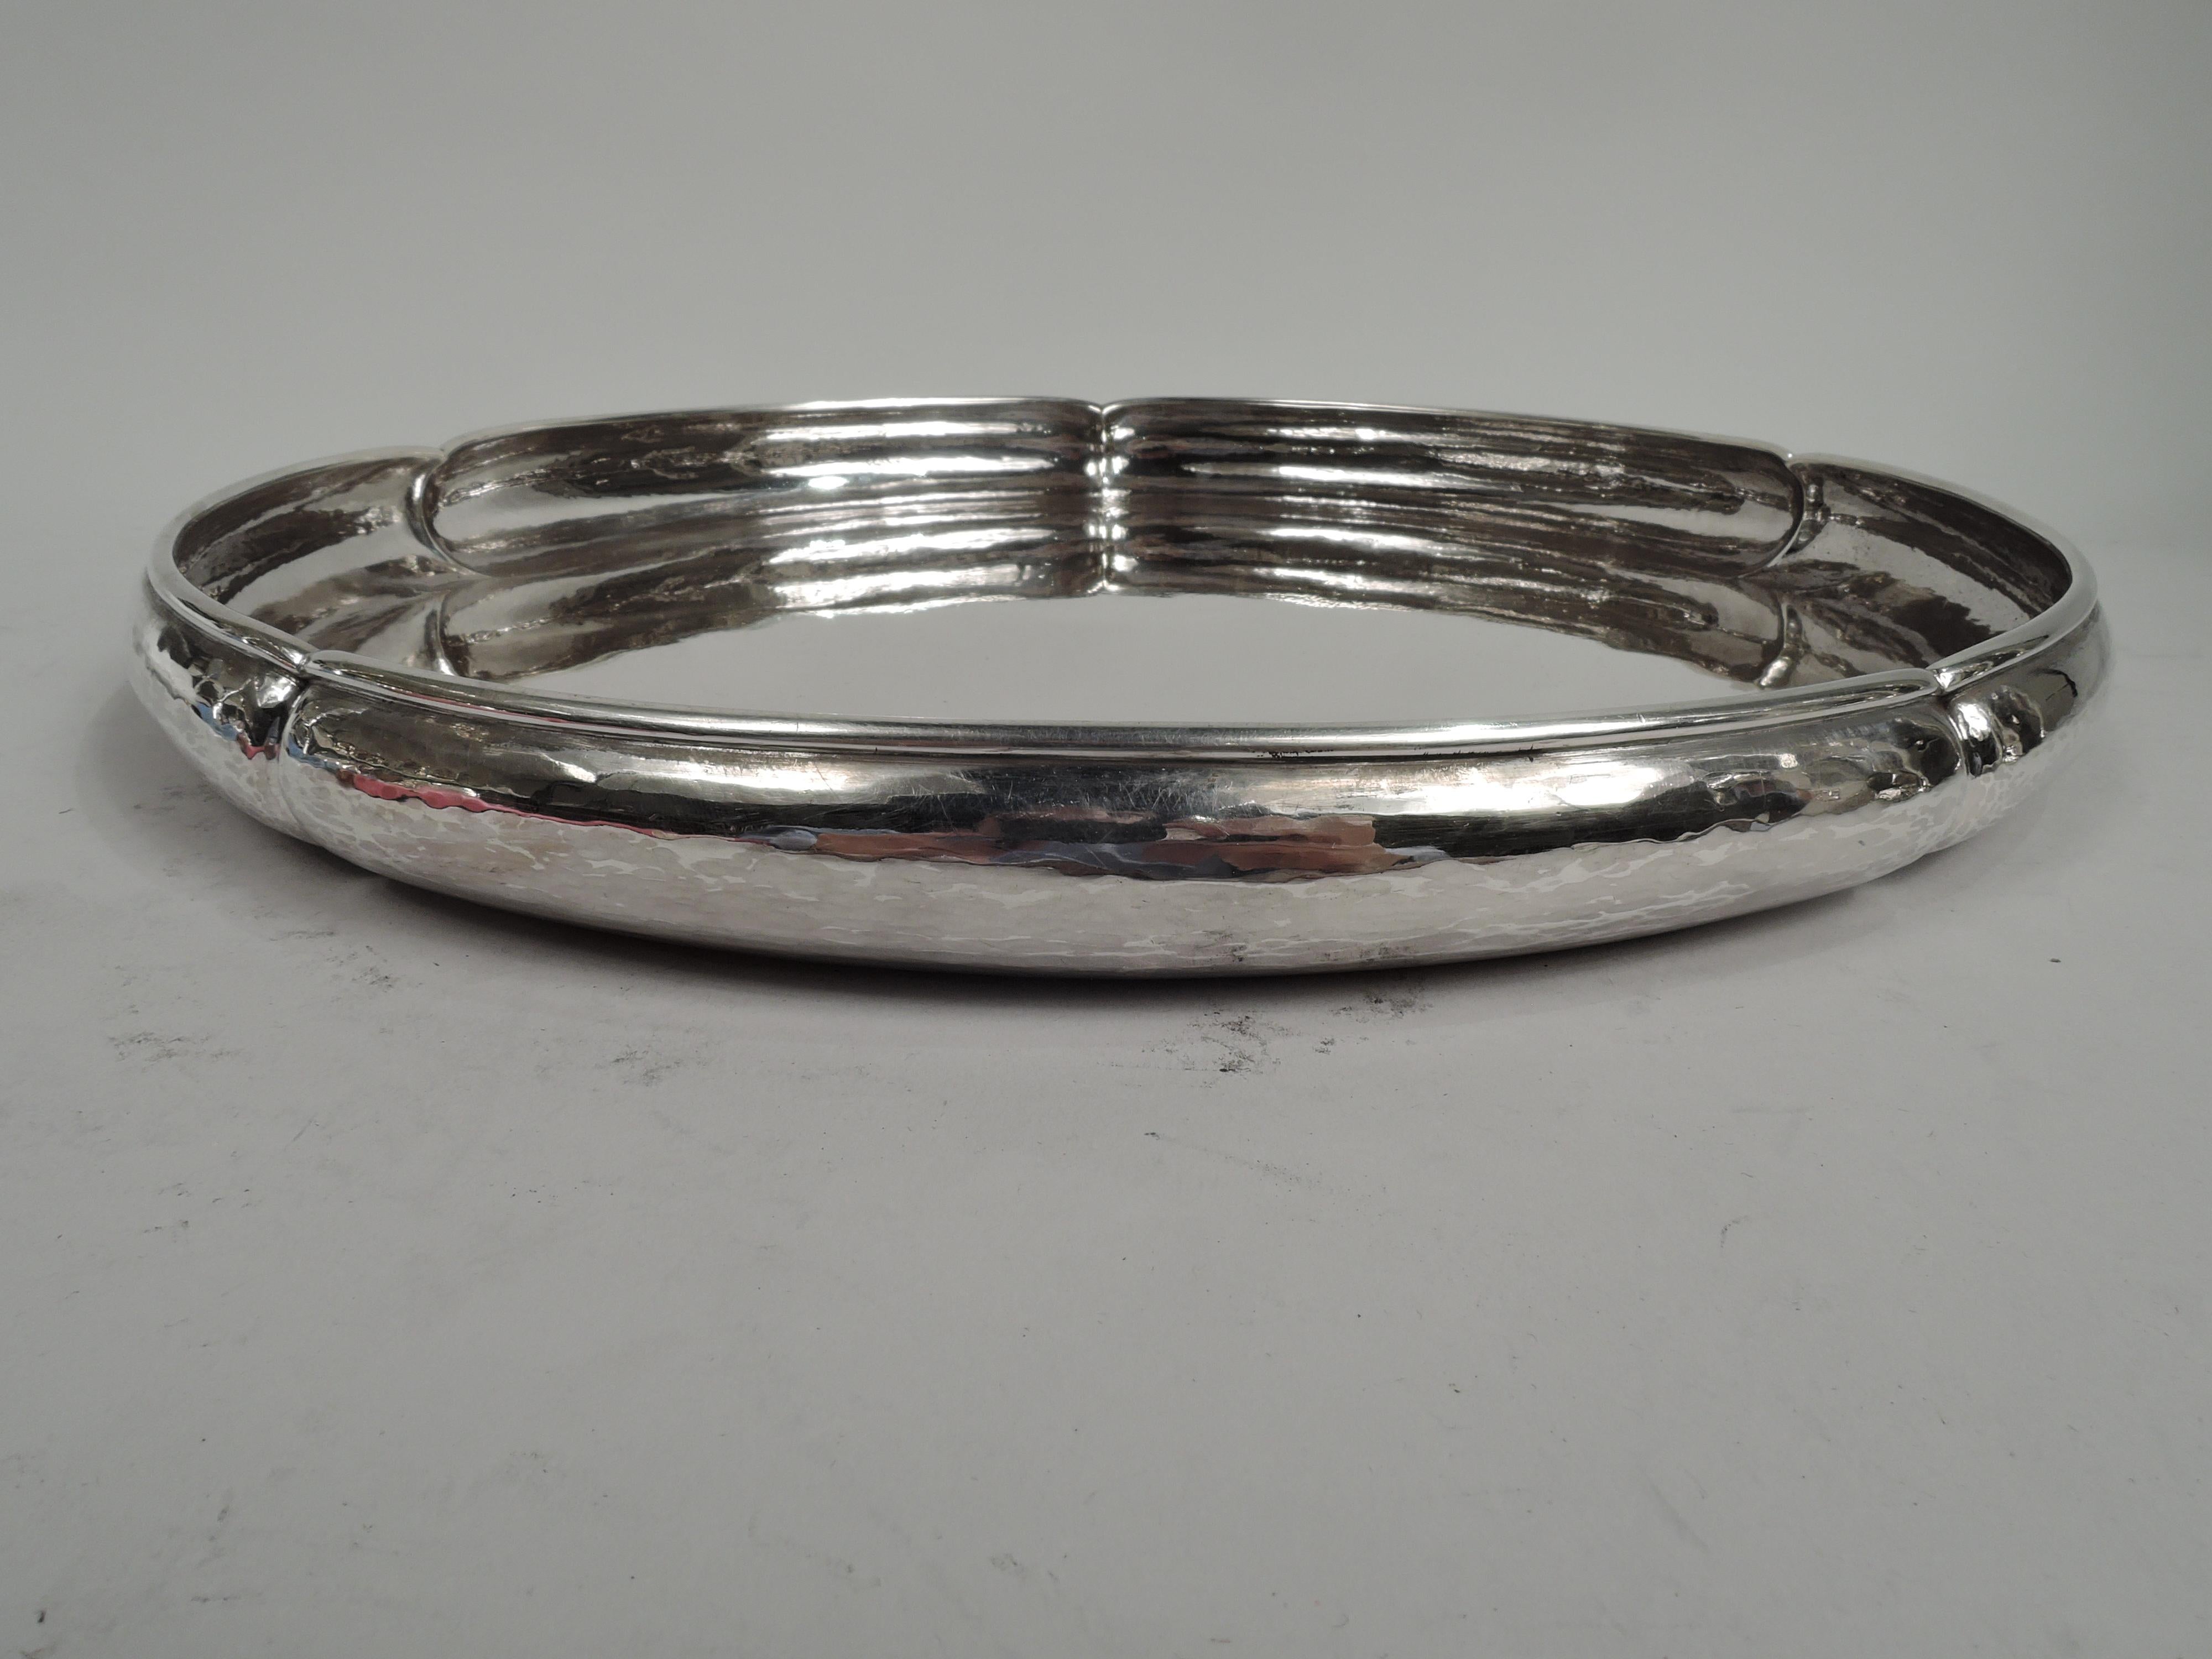 Craftsman sterling silver petal tray. Made by the Kalo Shop in Chicago, ca 1940. Plain and round well with curved and lobed hand-hammered sides. Nice heft with plenty of room for the appetizers. For table or buffet. Marked “Sterling / Hand Wrought /